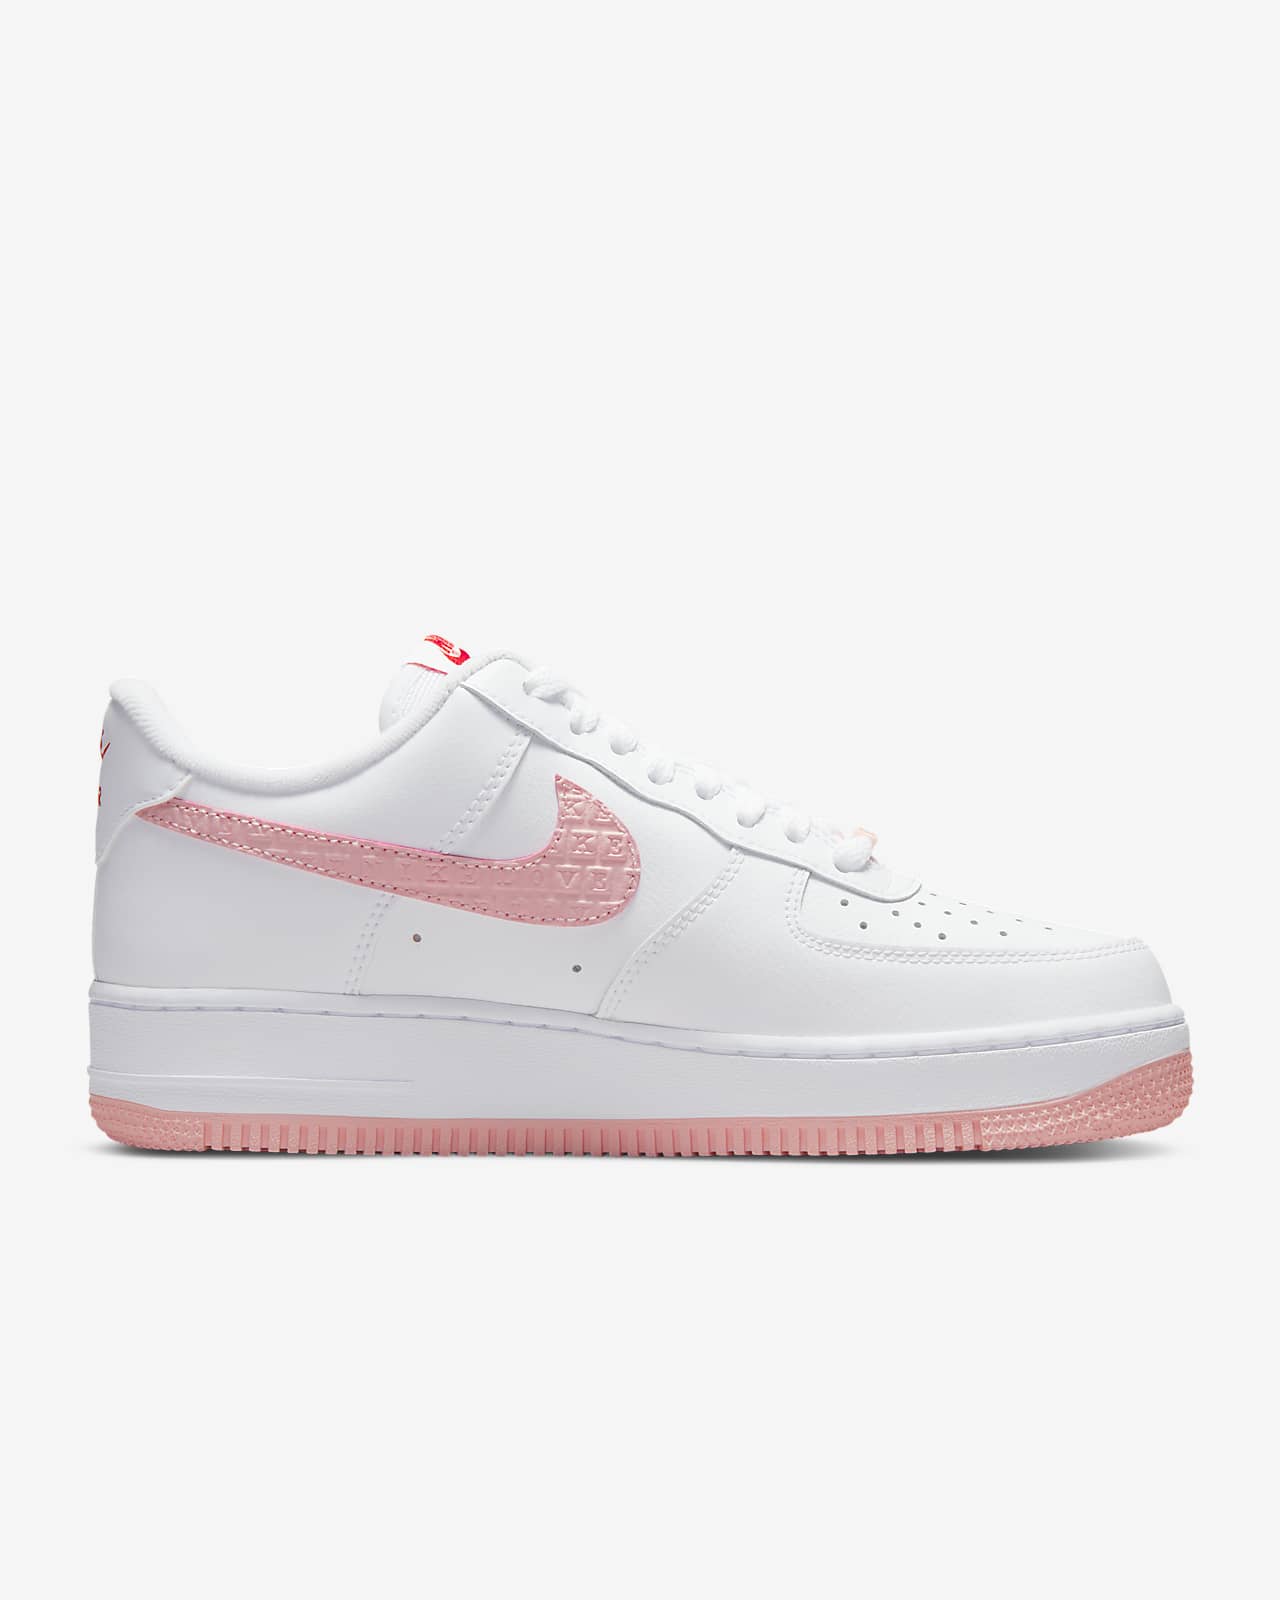 Nike Air Force 1 '07 Women's Shoes رسم حاجب